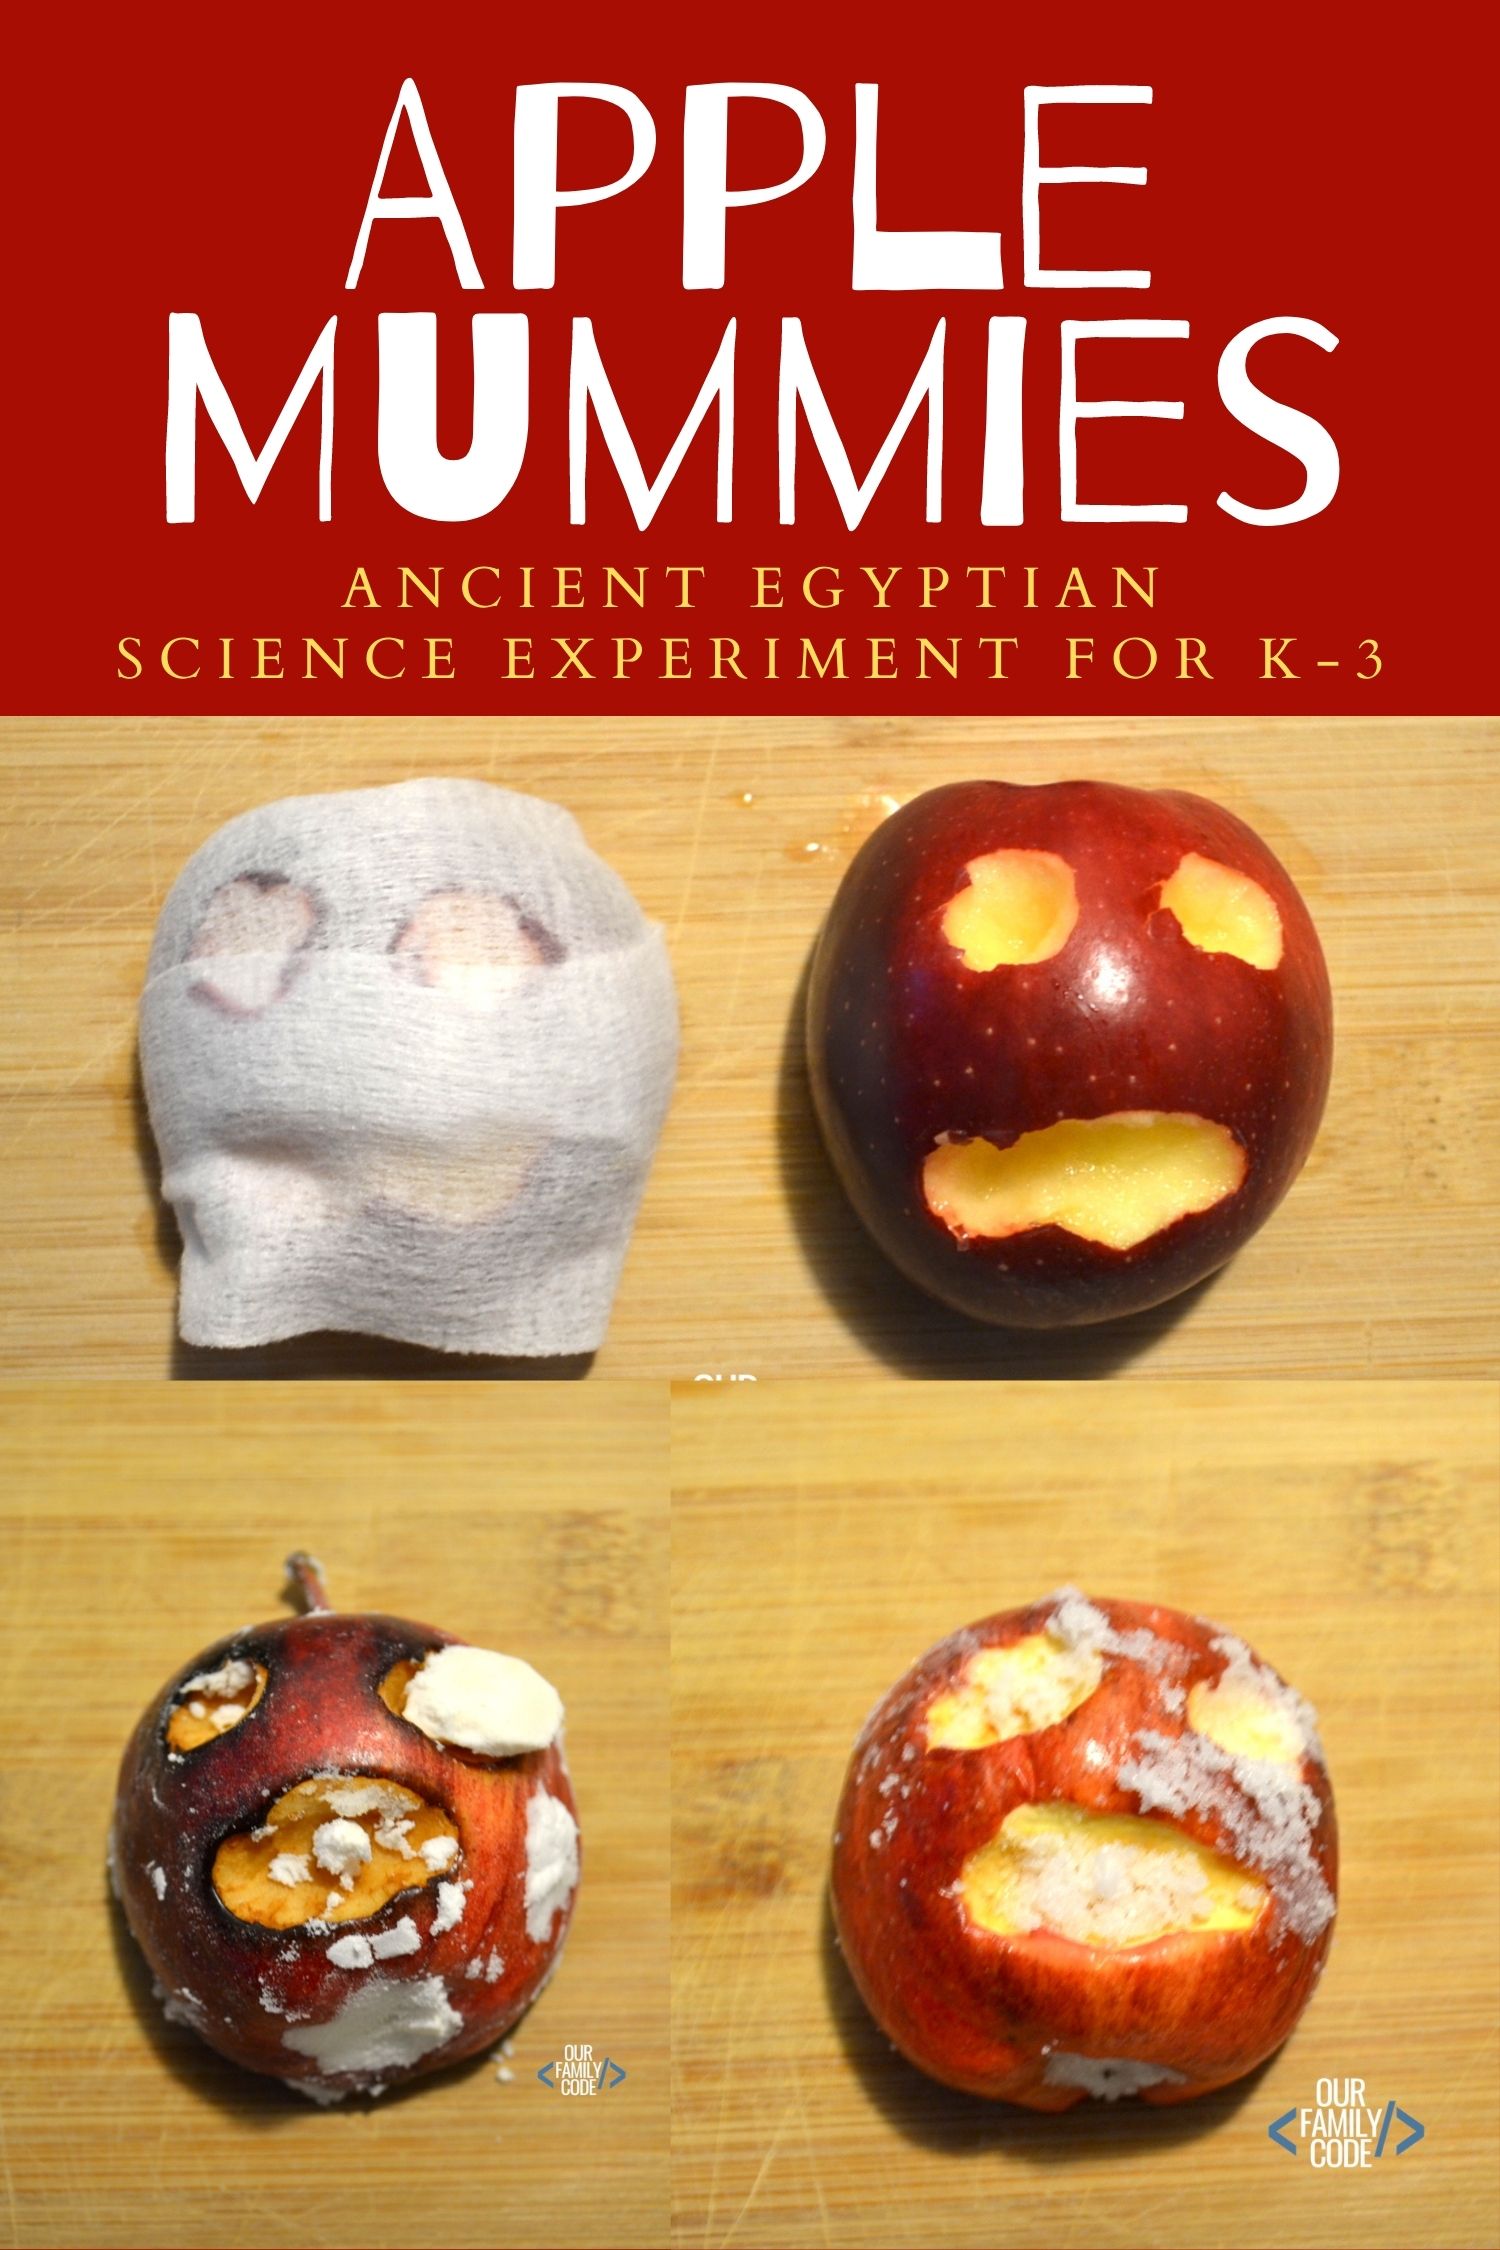 A picture of apple mummies ancient Egyptian experiment for k-3.